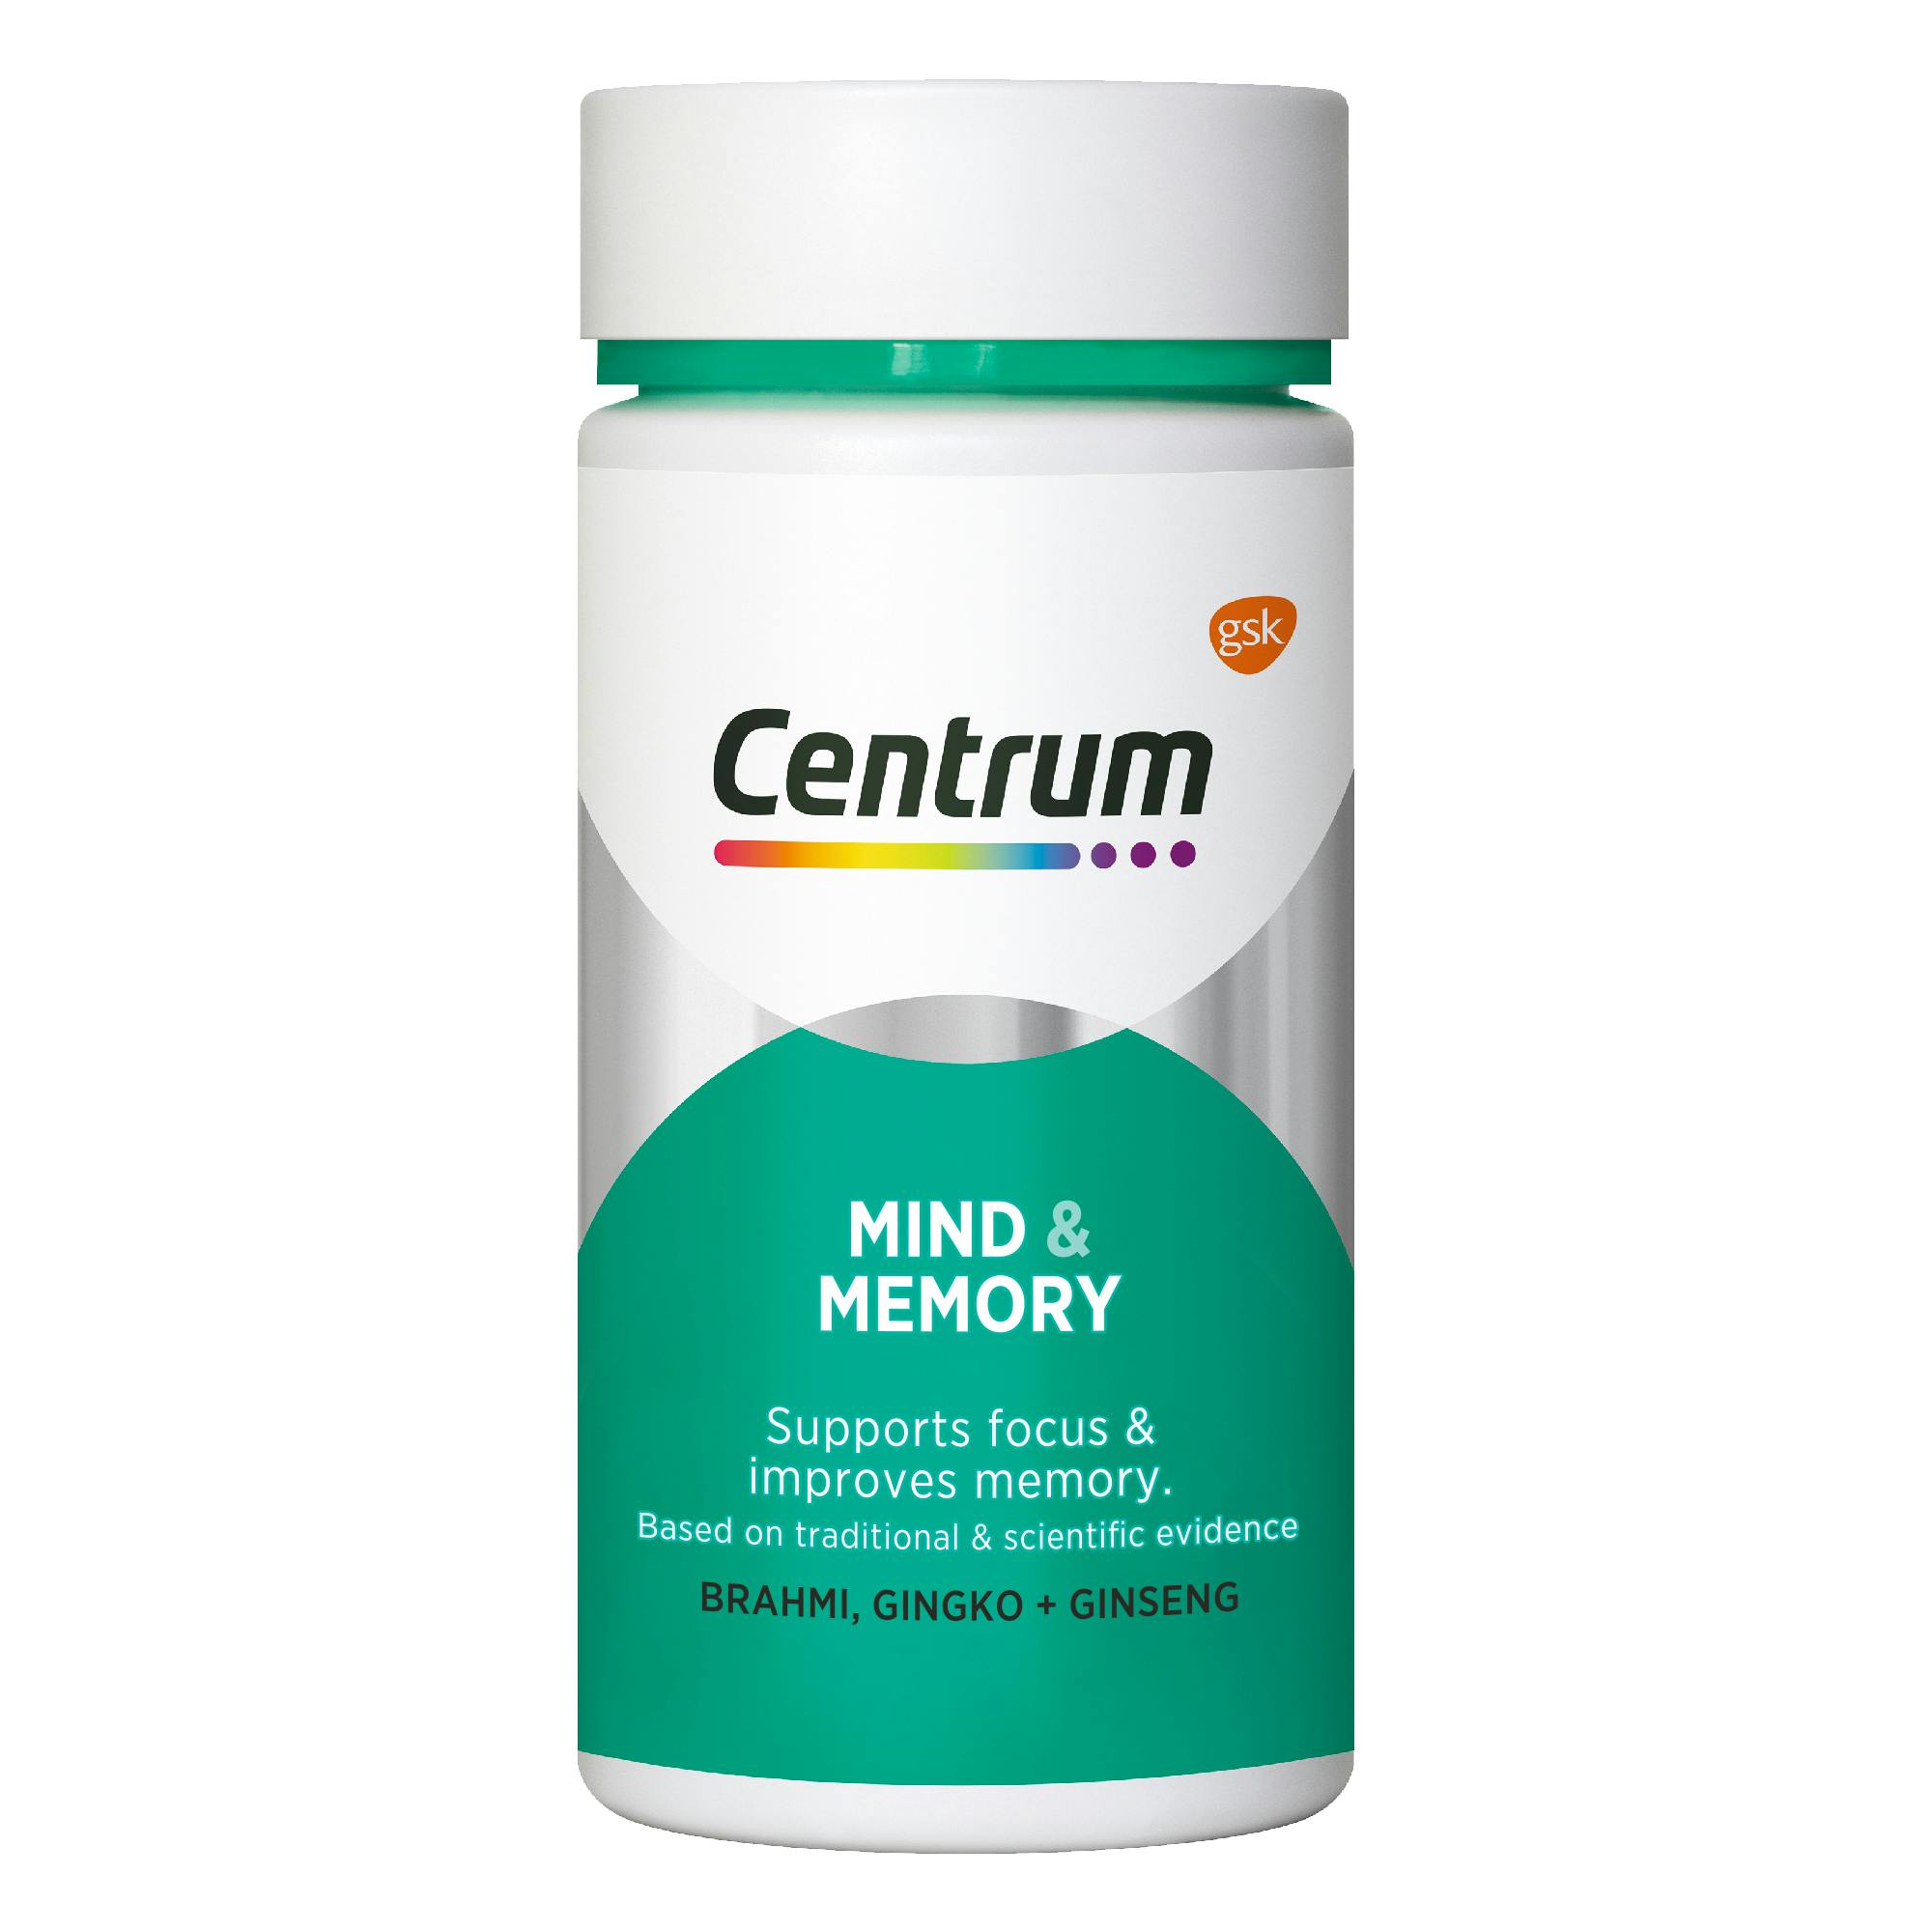 Bottle of Mind & Memory from the Centrum Benefits Blend (50 capsules).